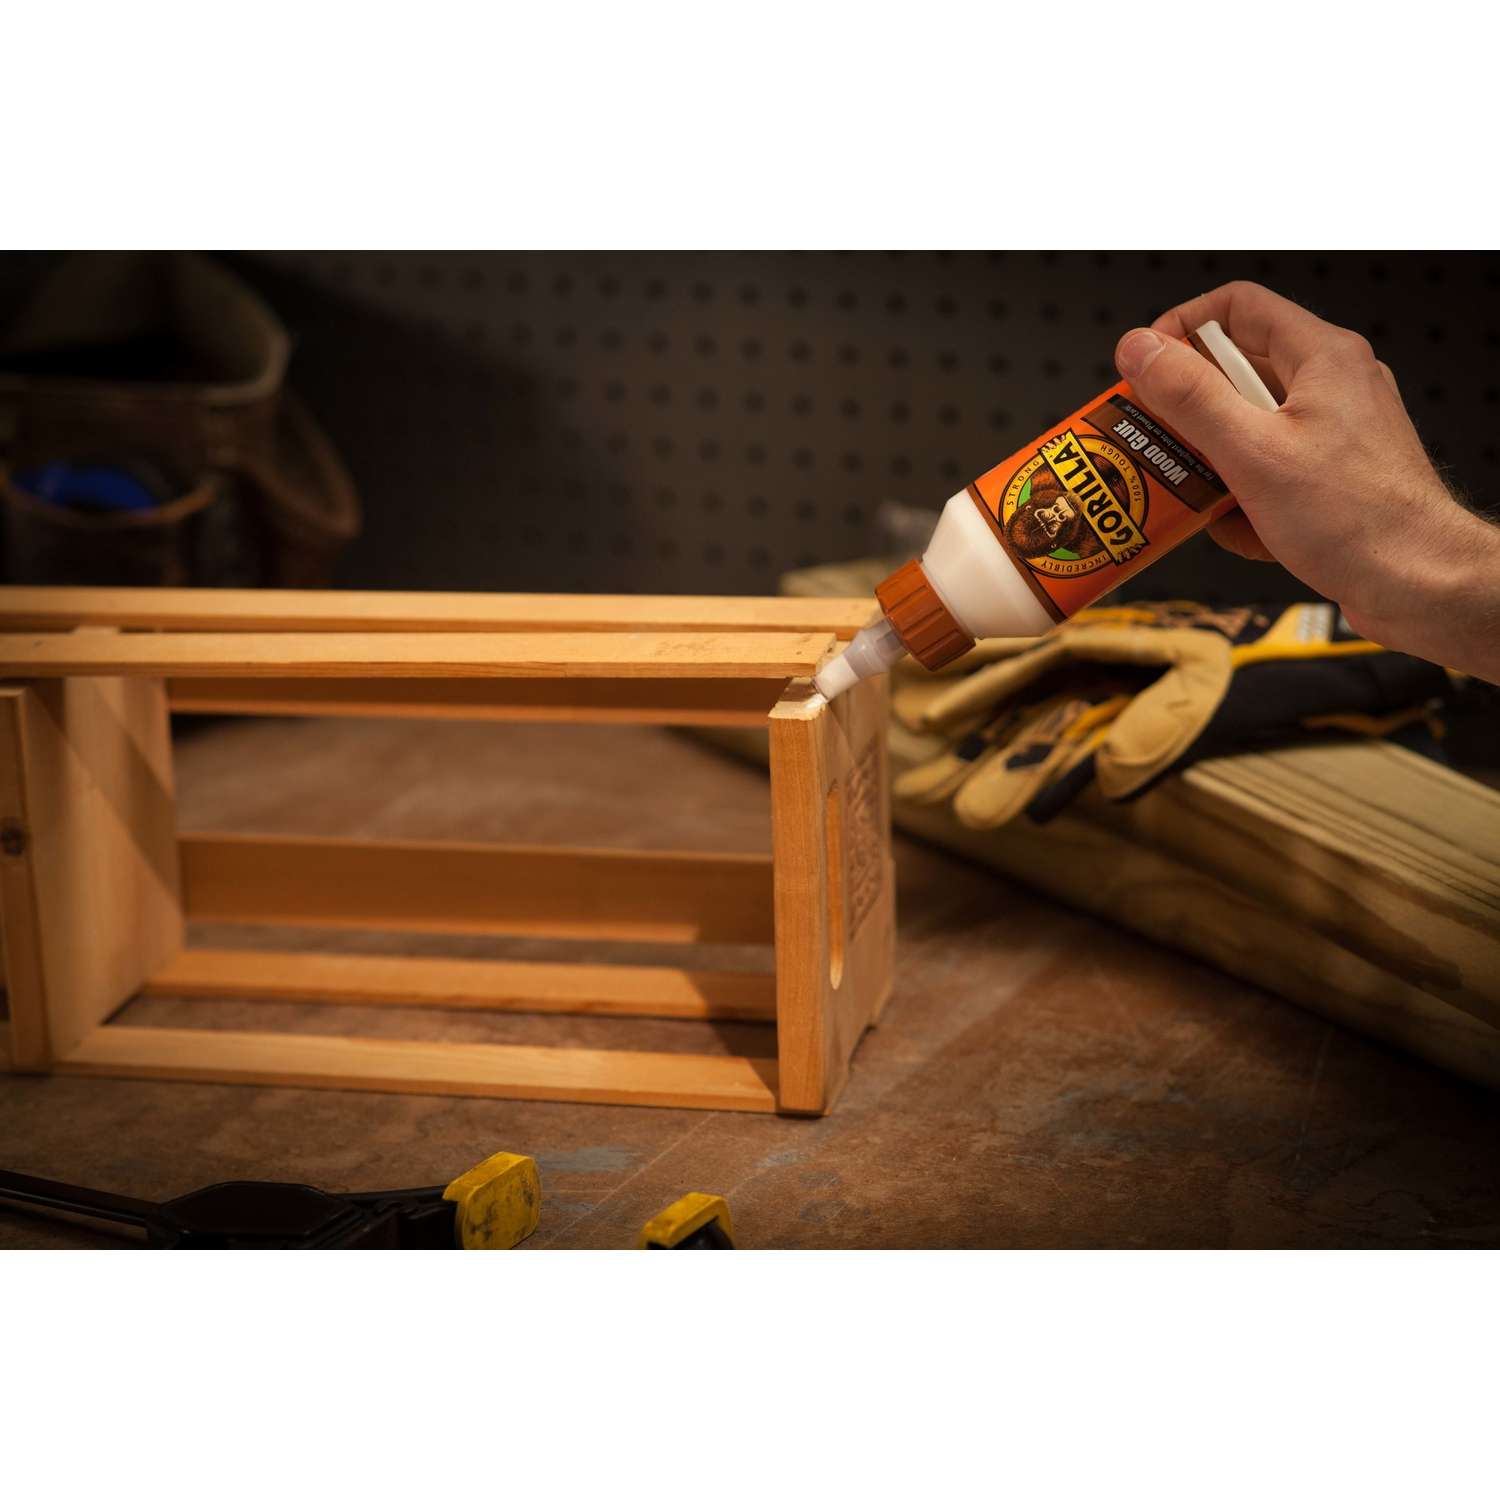 Gorilla Wood Glue: Know Everything You Need To Know About It